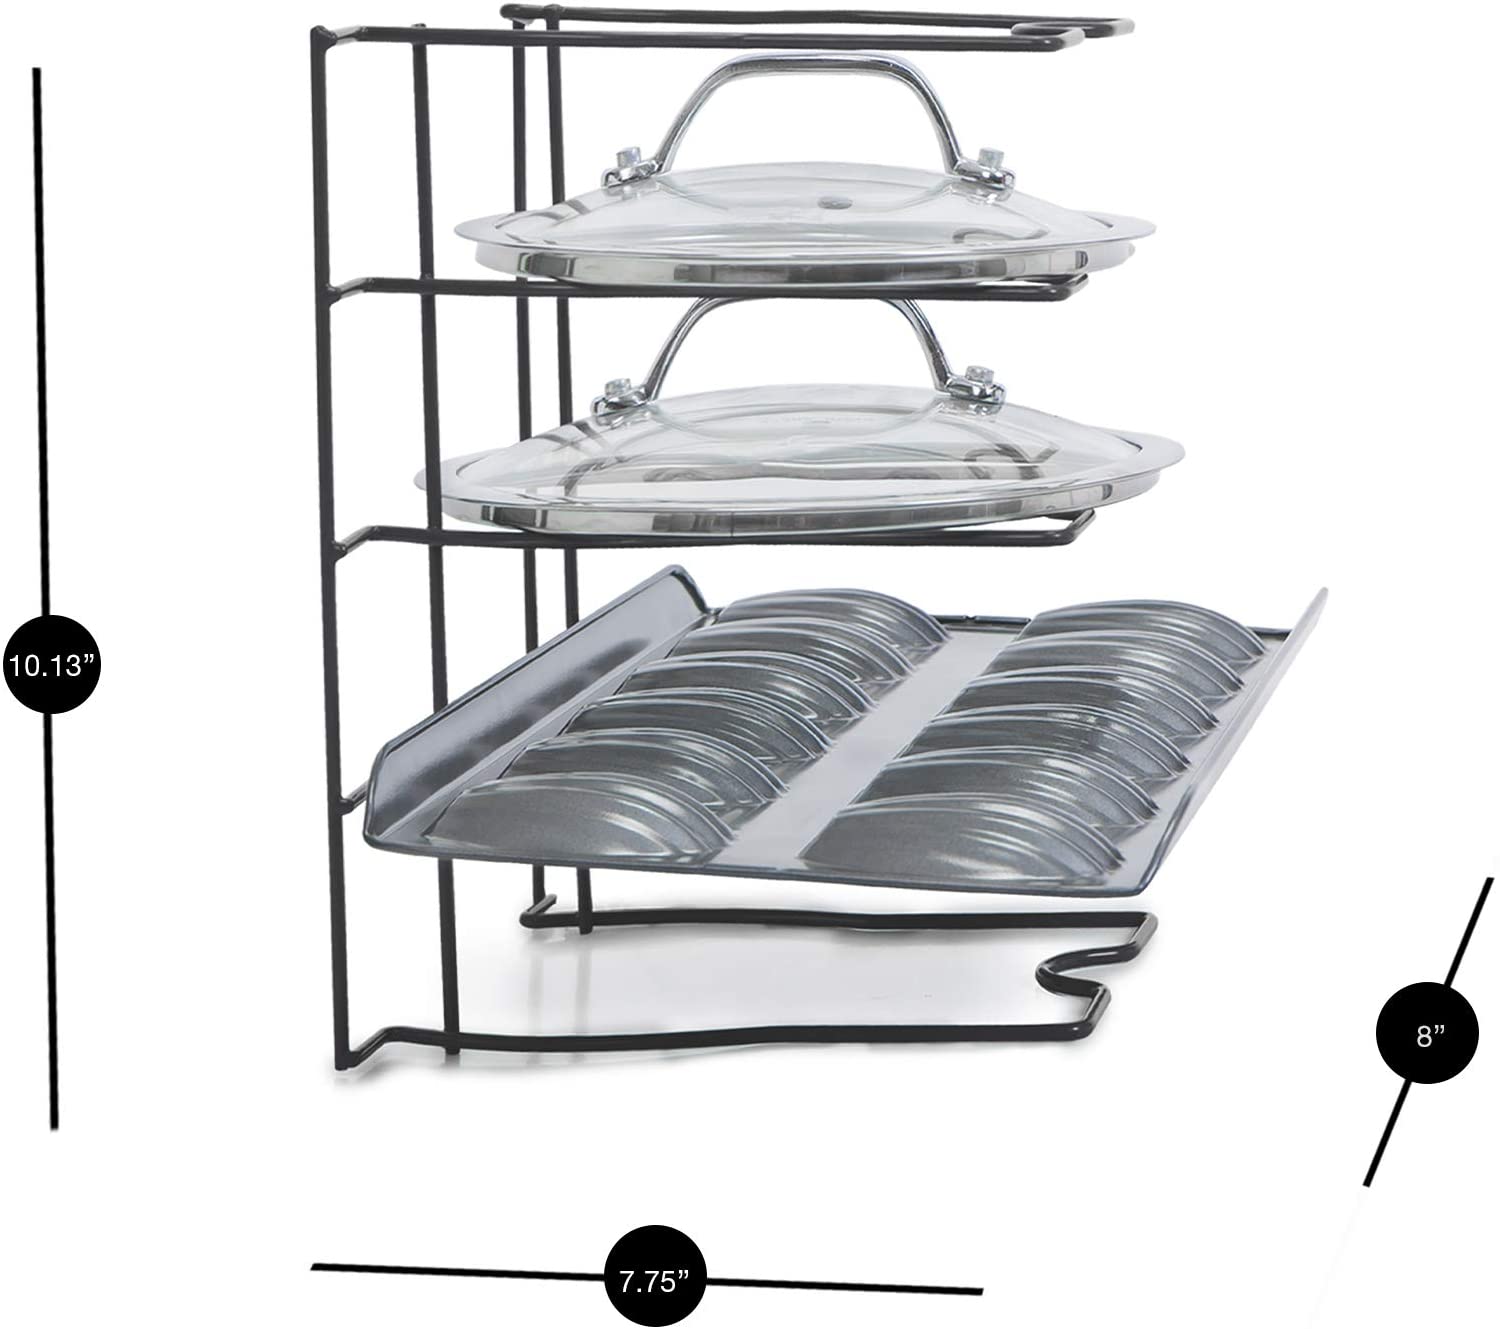 Bakeware and Lid Storage Rack with 4-Compartment Dividers - Smart Design® 23